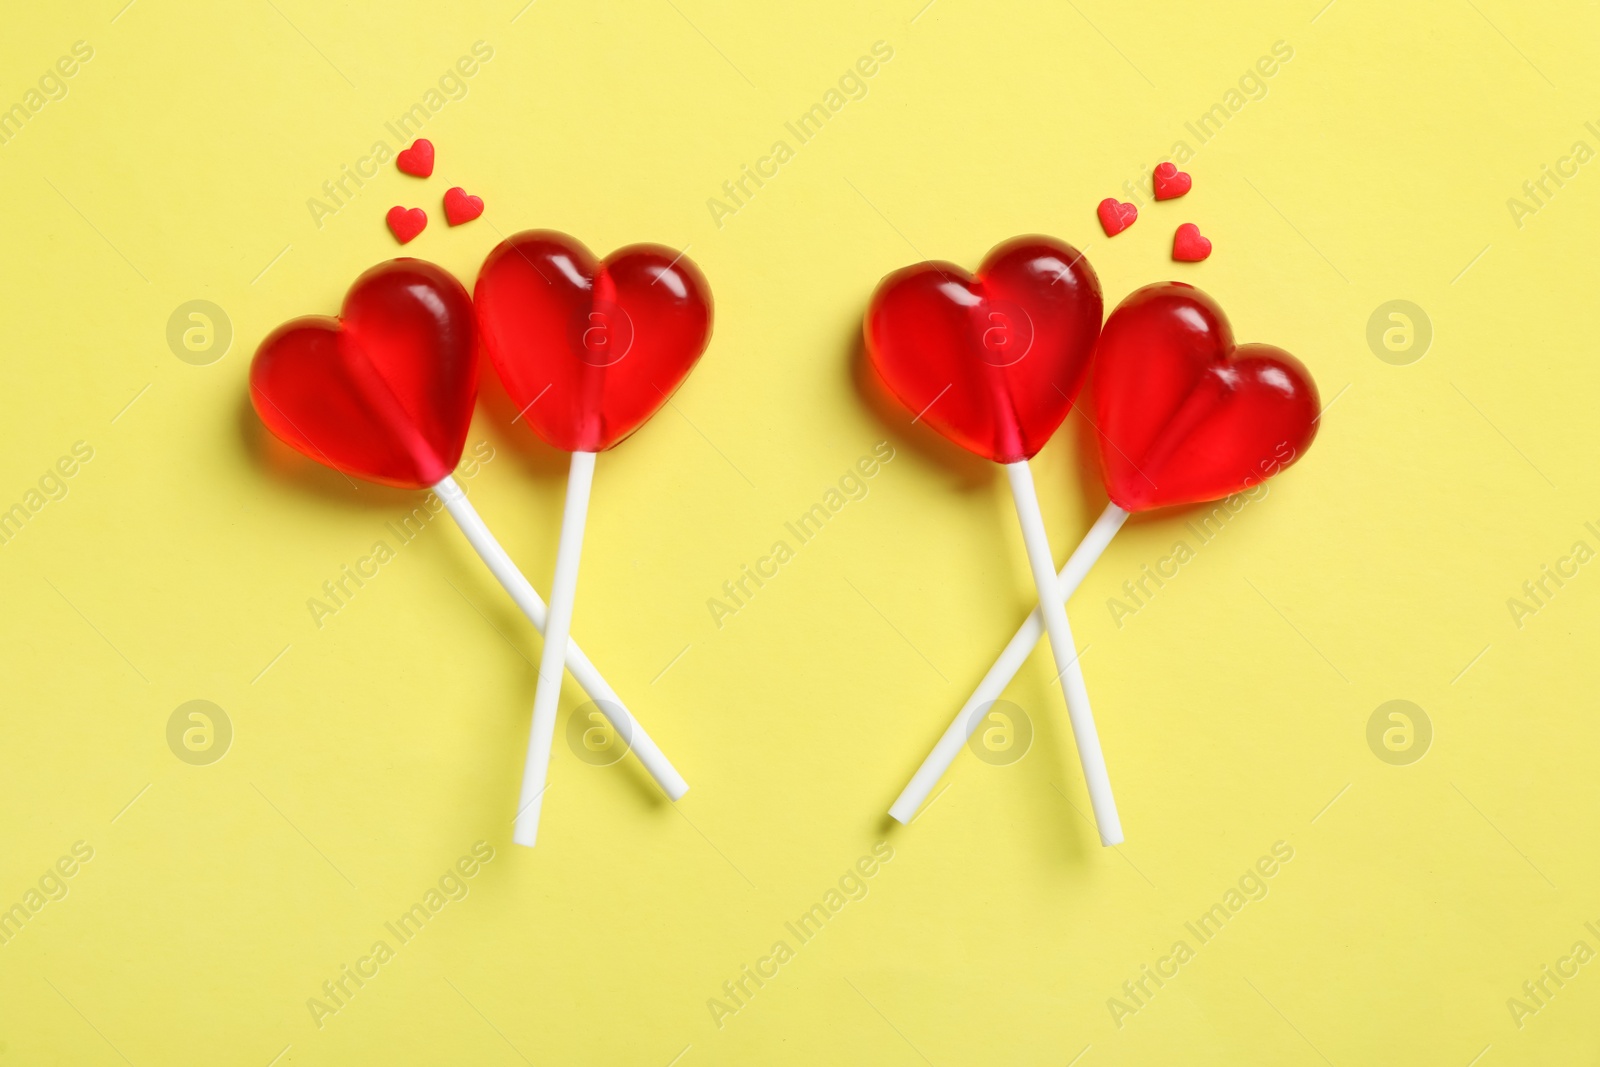 Photo of Sweet heart shaped lollipops and sprinkles on yellow background, flat lay. Valentine's day celebration